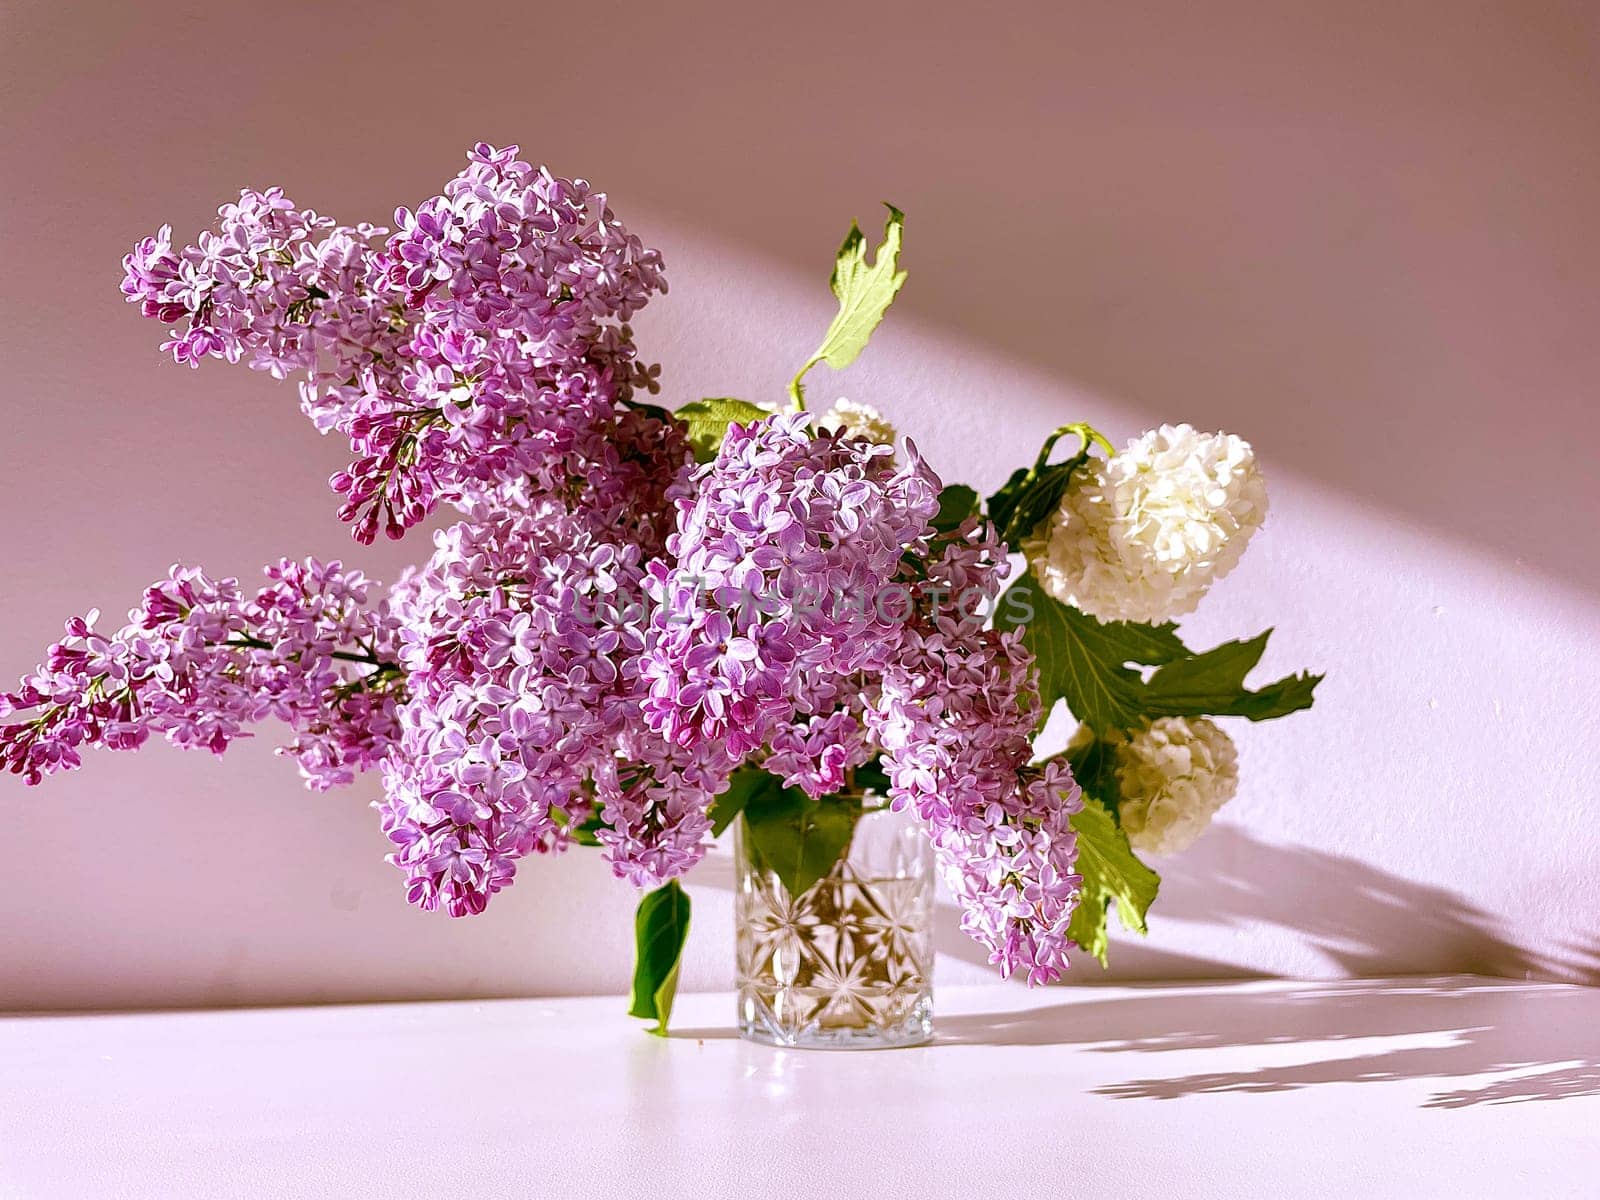 On a pink background in sunlight, a bouquet of purple lilac and white viburnum. High quality photo